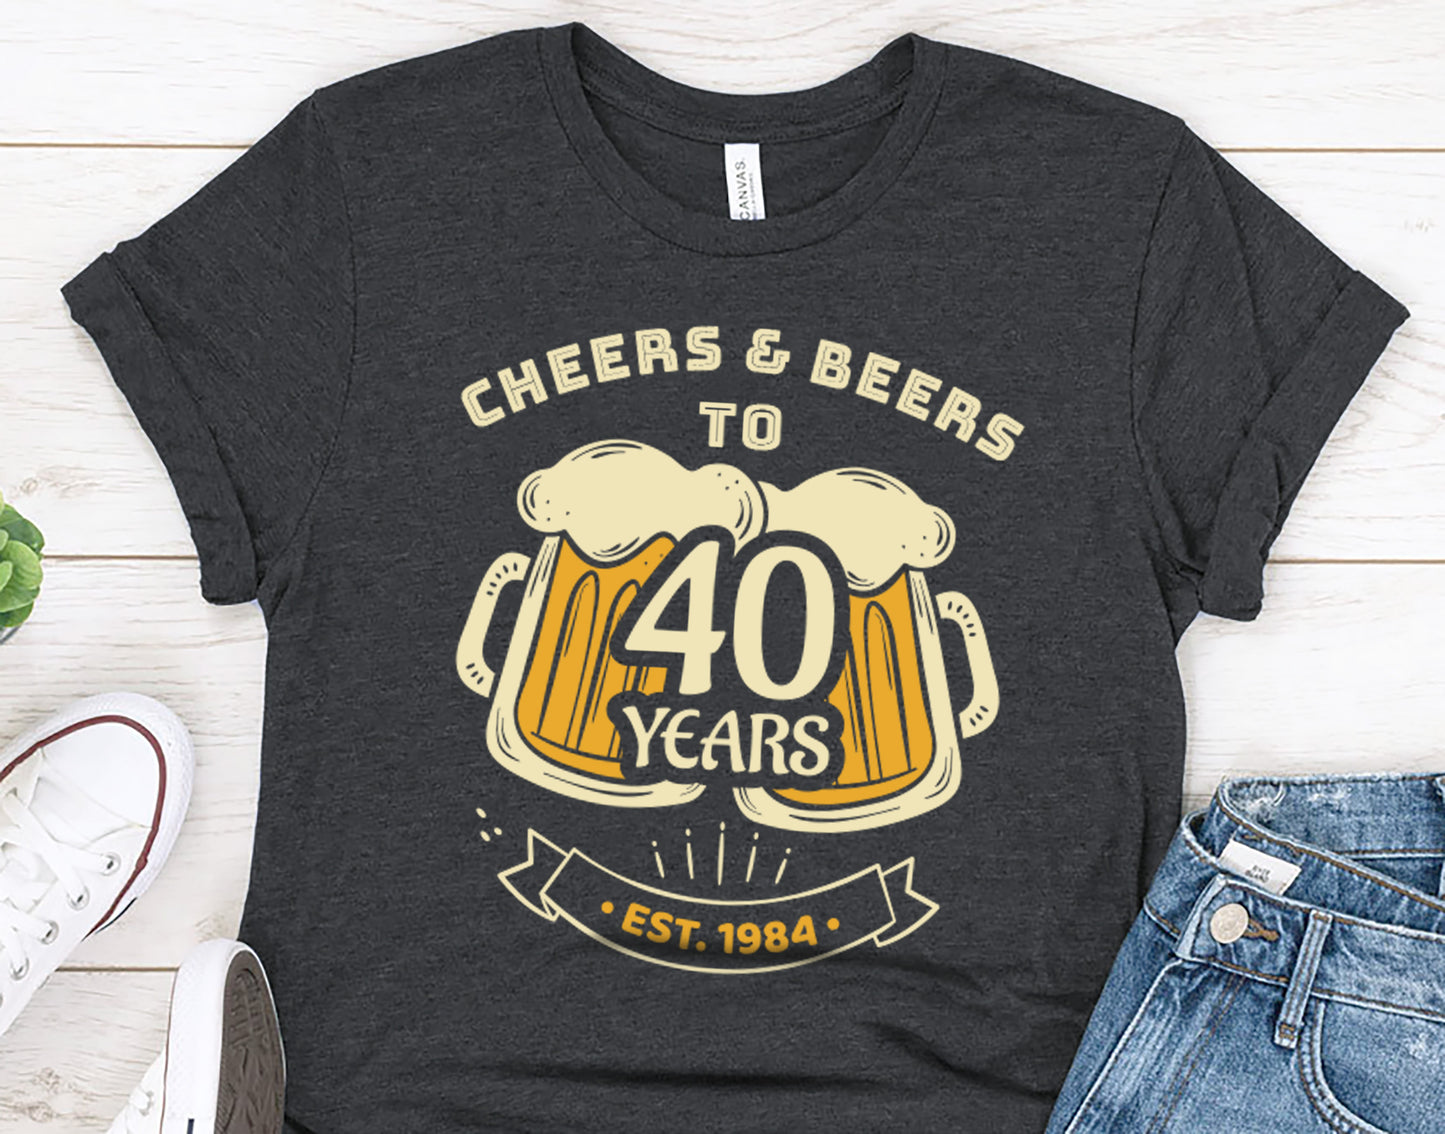 Cheers and Beers to 40 years, 40th Birthday Gift Shirt for Men or Women